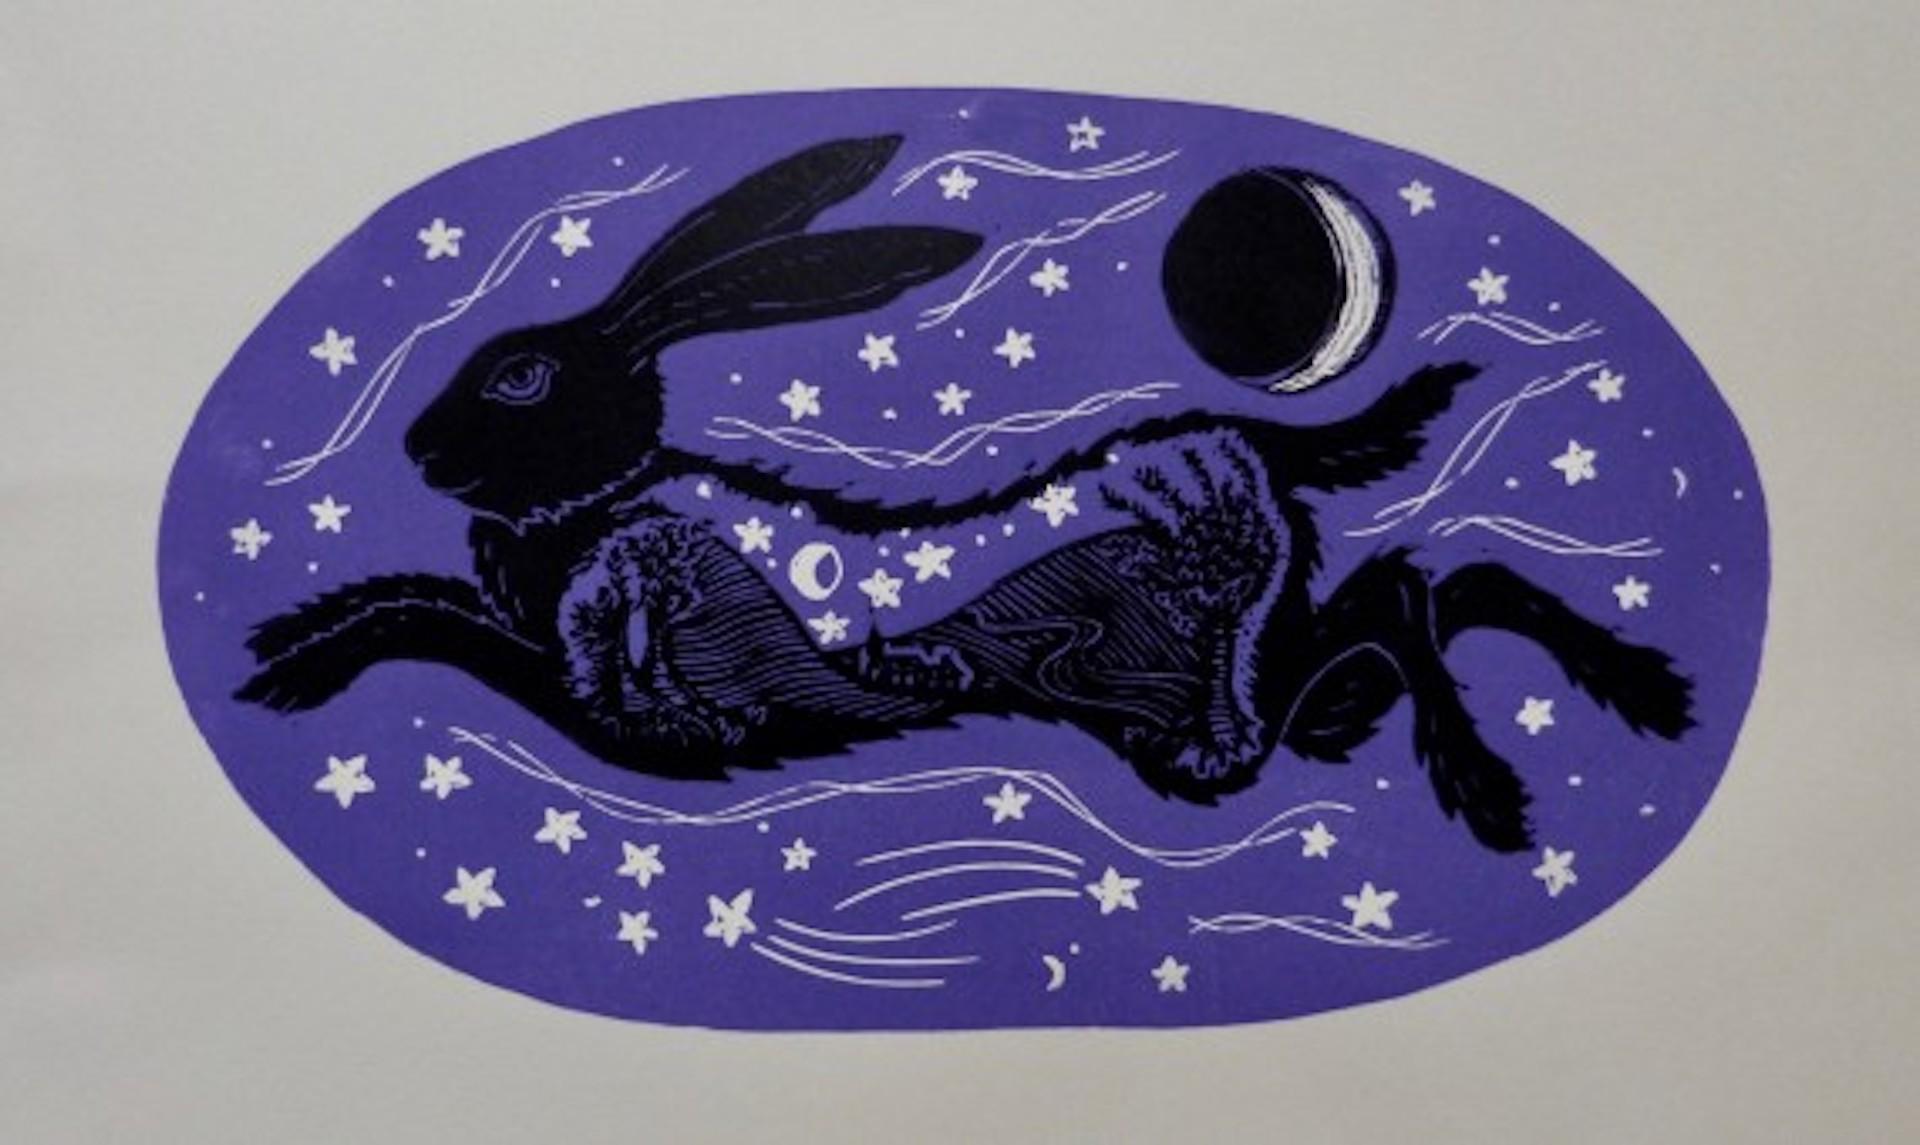 Leaping Hare, Kate Willows, Druck in limitierter Auflage, Astrologie, Tier, Sterne, Himmel